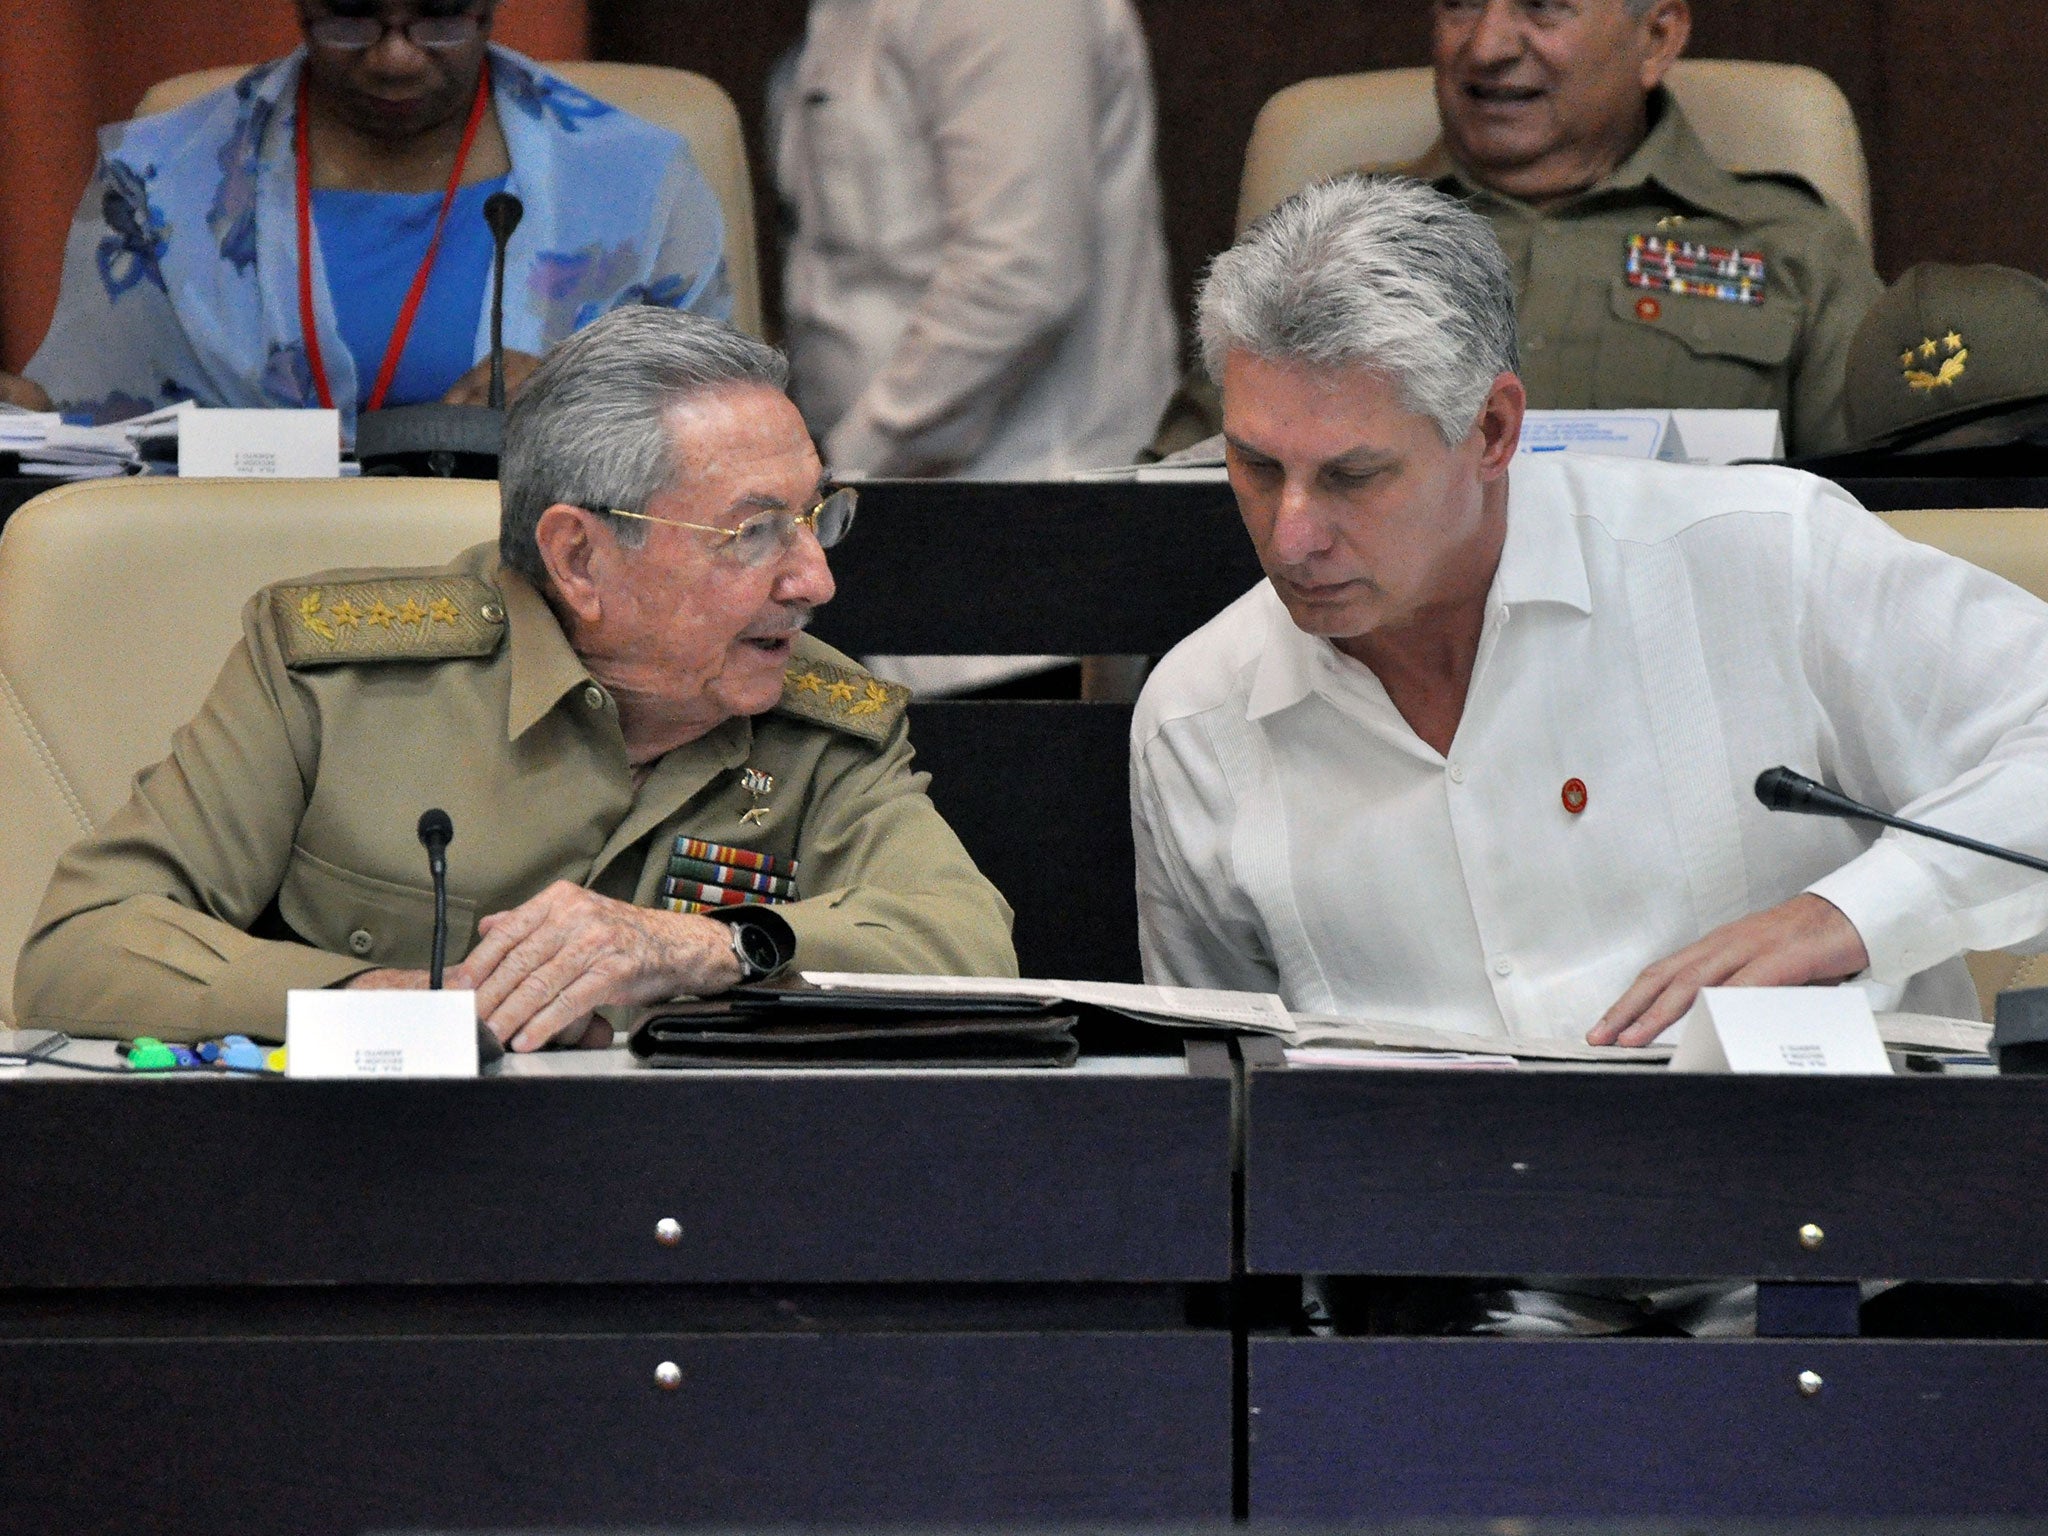 Raul Castro (left) will likely hand over the reigns to his right hand man, Miguel Diaz-Canel, when he retires as Cuba’s president